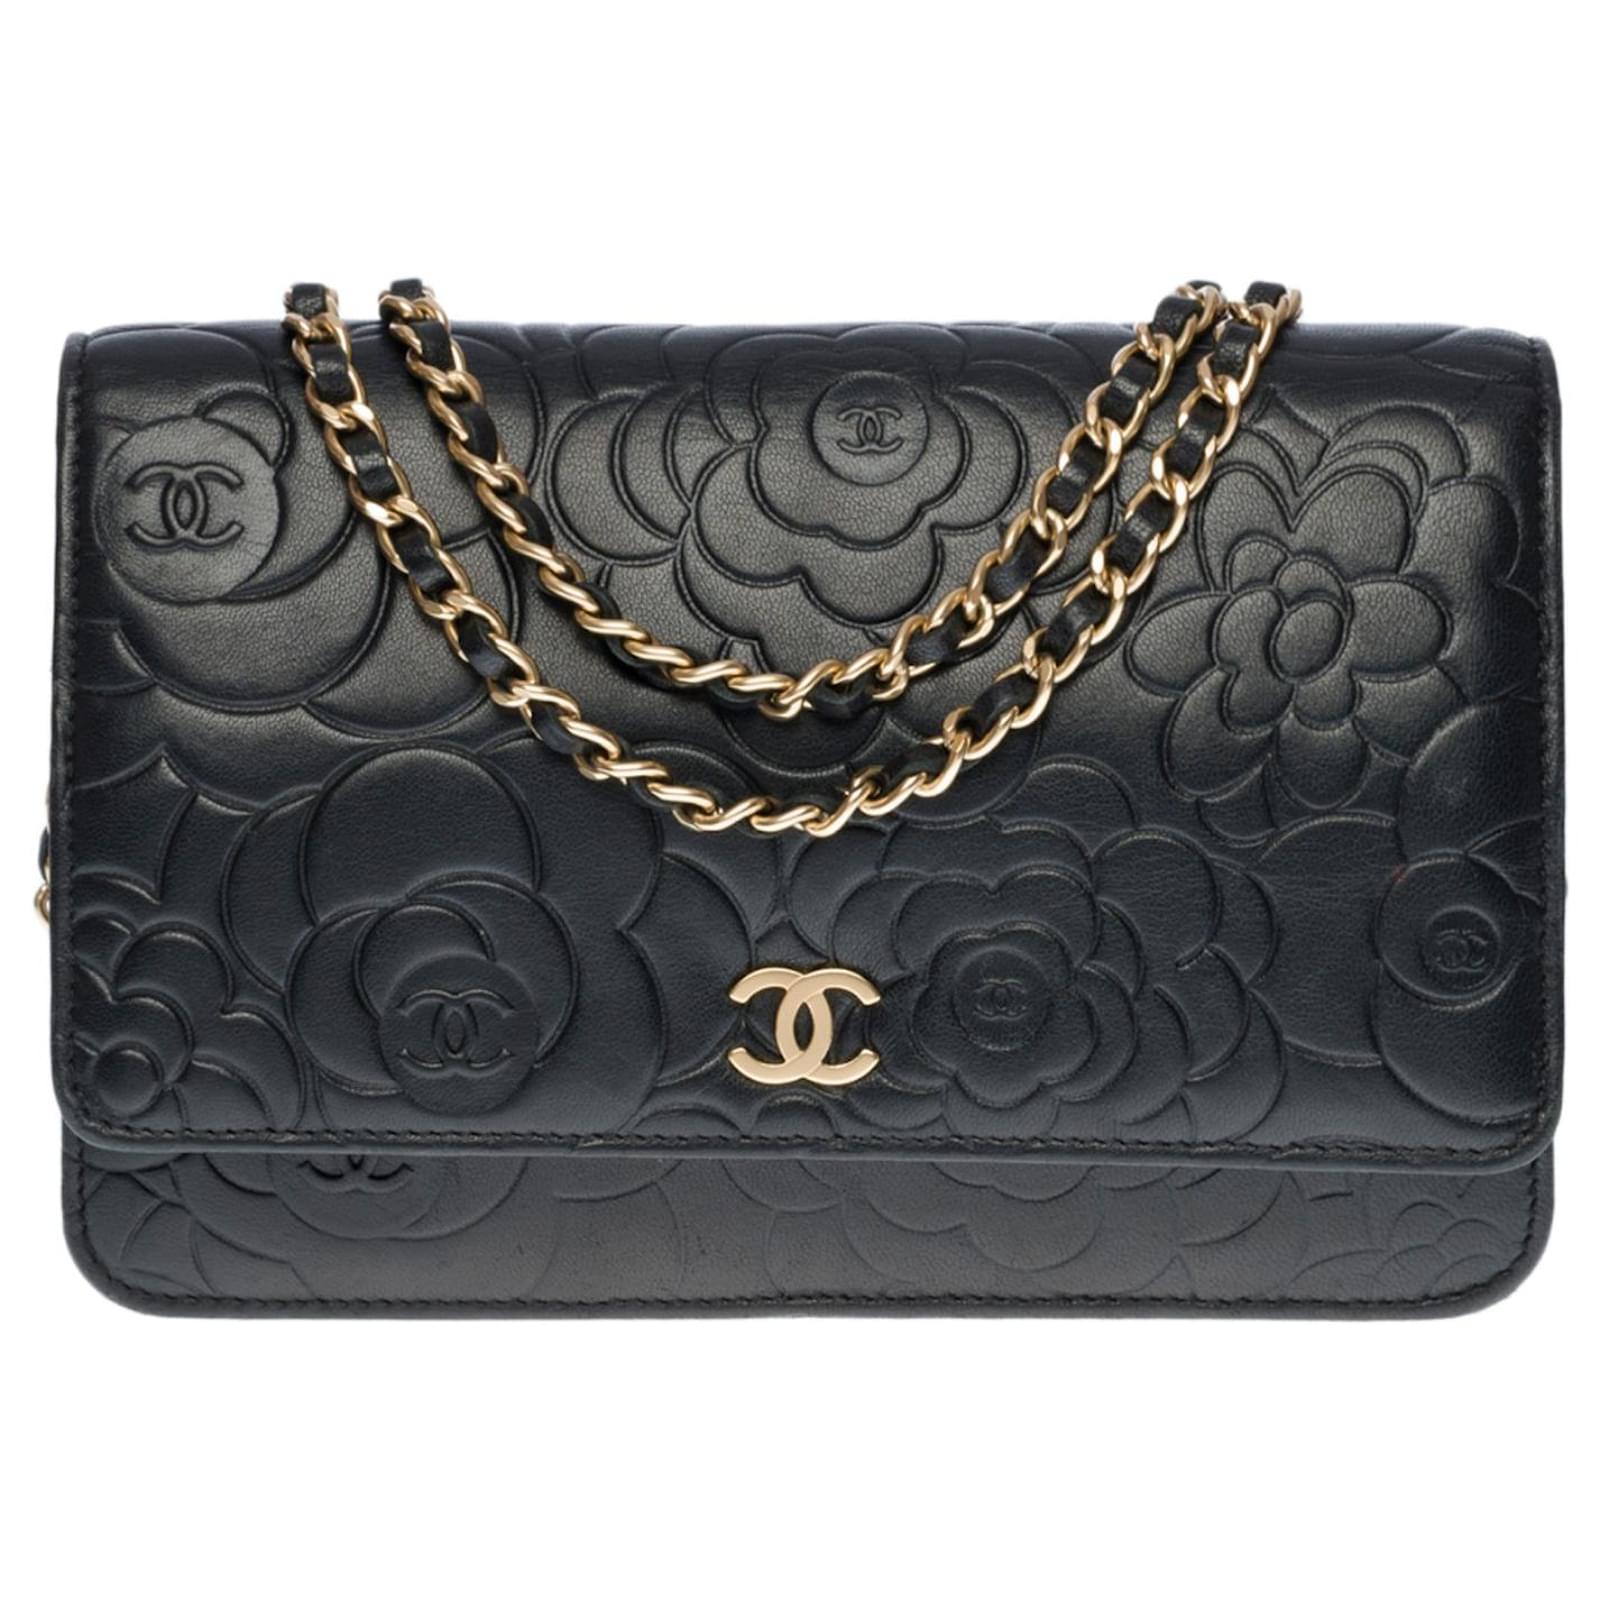 Beautiful Chanel Wallet On Chain bag in black Camellia leather ...